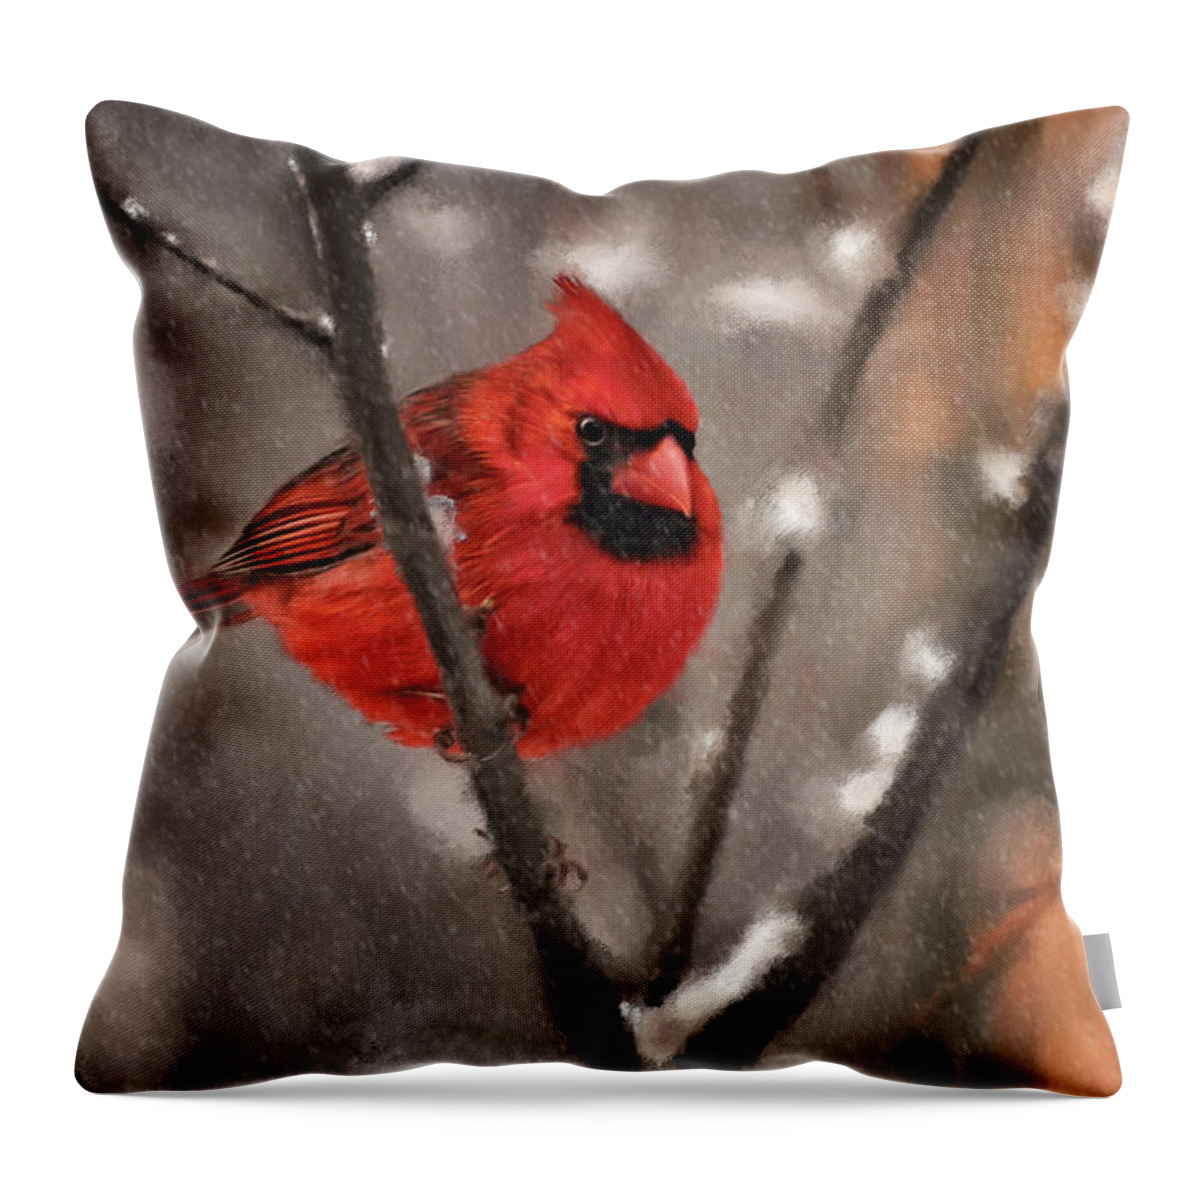 Cardinal Throw Pillow featuring the digital art A Spot Of Color by Lois Bryan